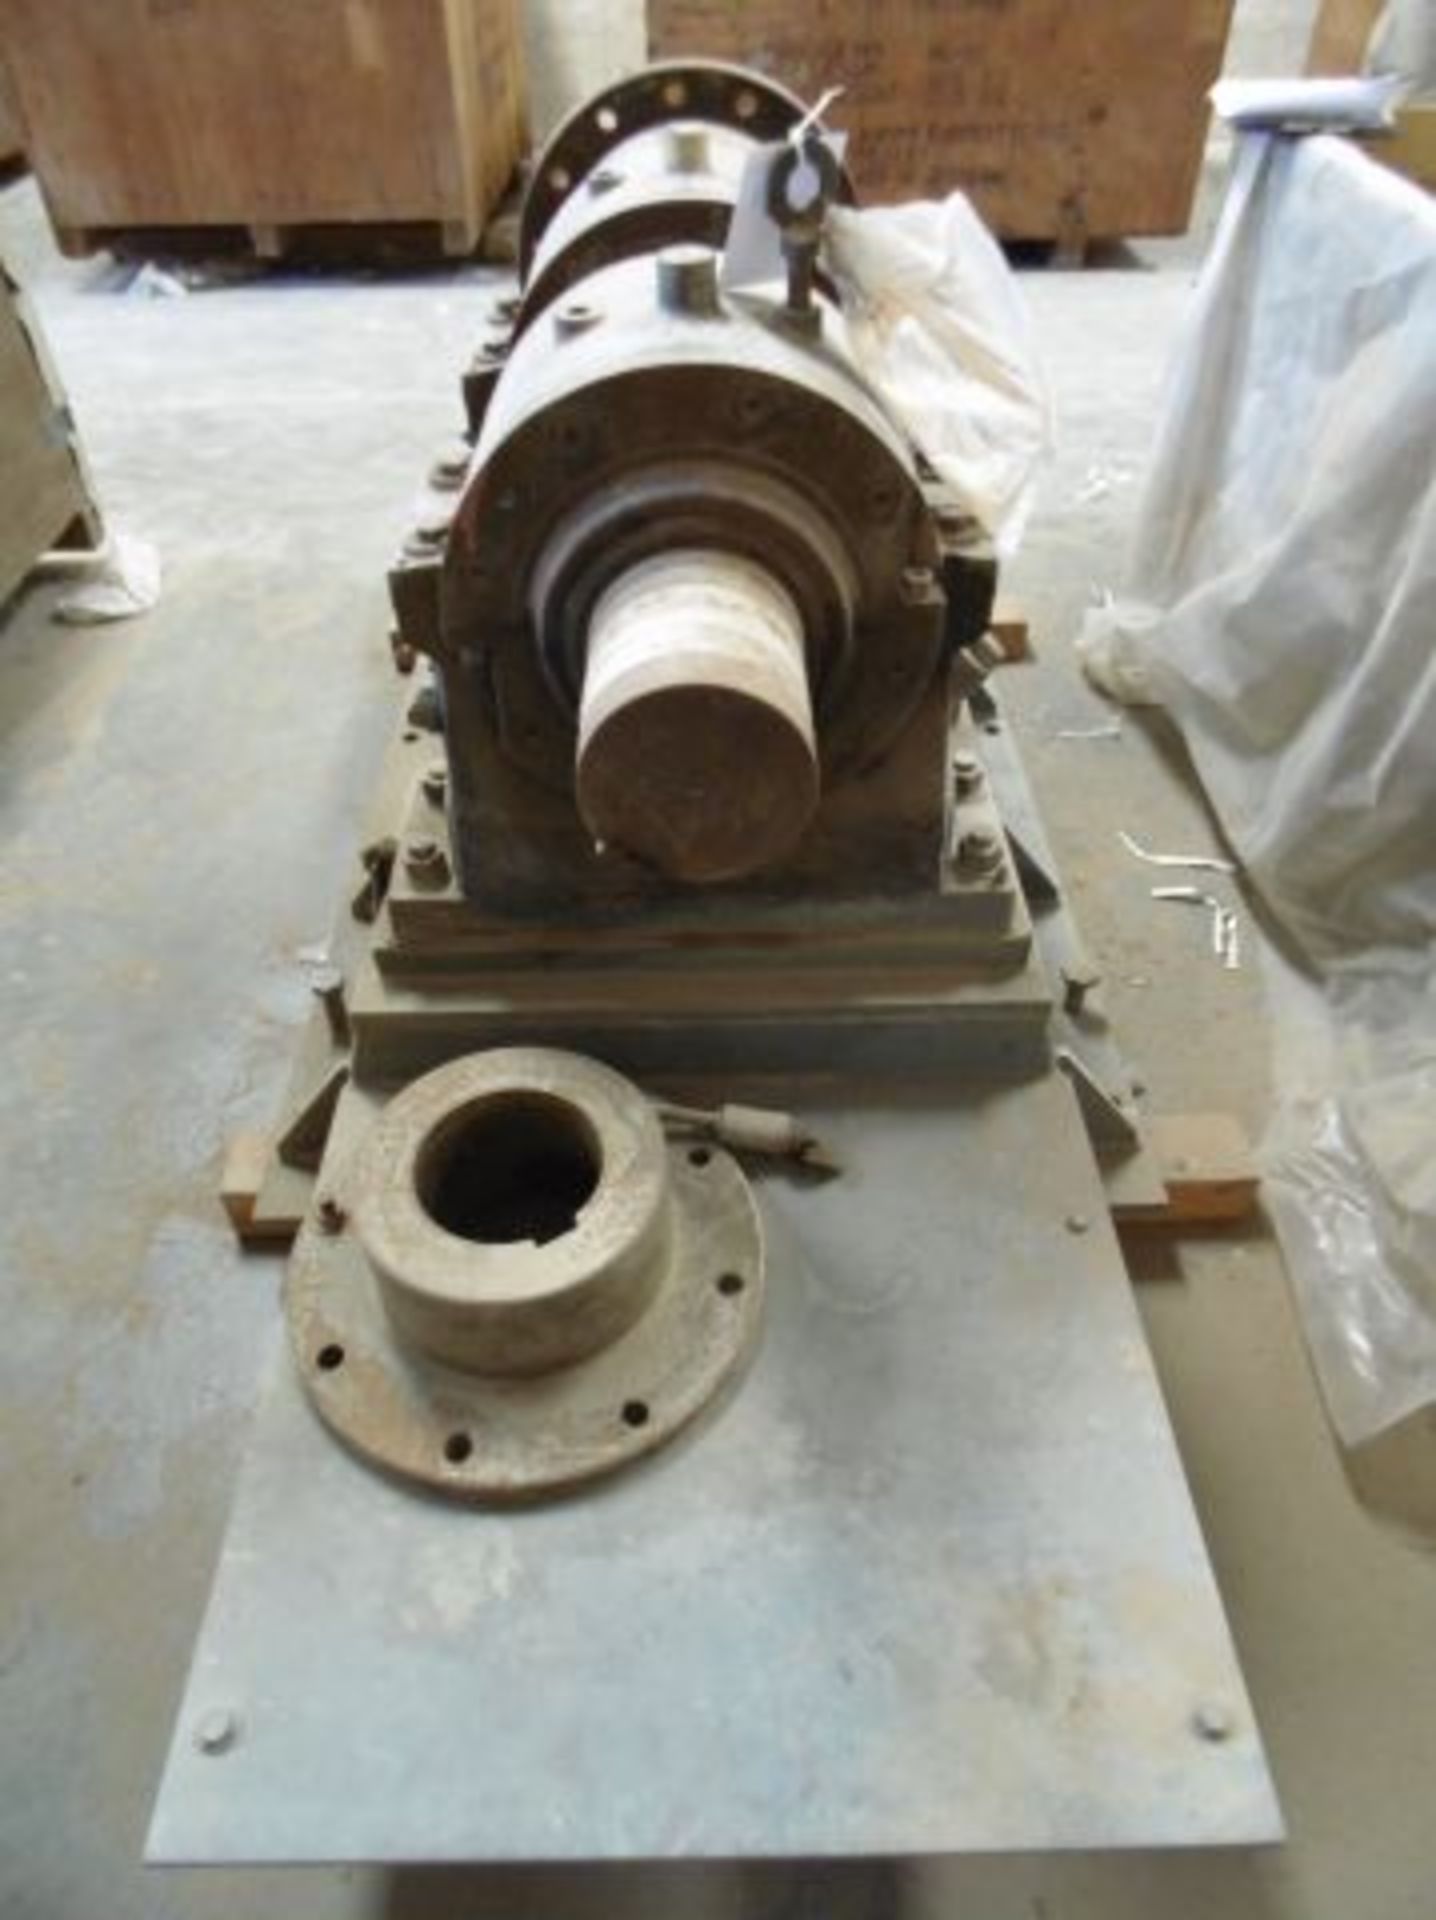 Horizontal Splined Drive Spindle Assembly with twin supports on Steel base - Image 2 of 2